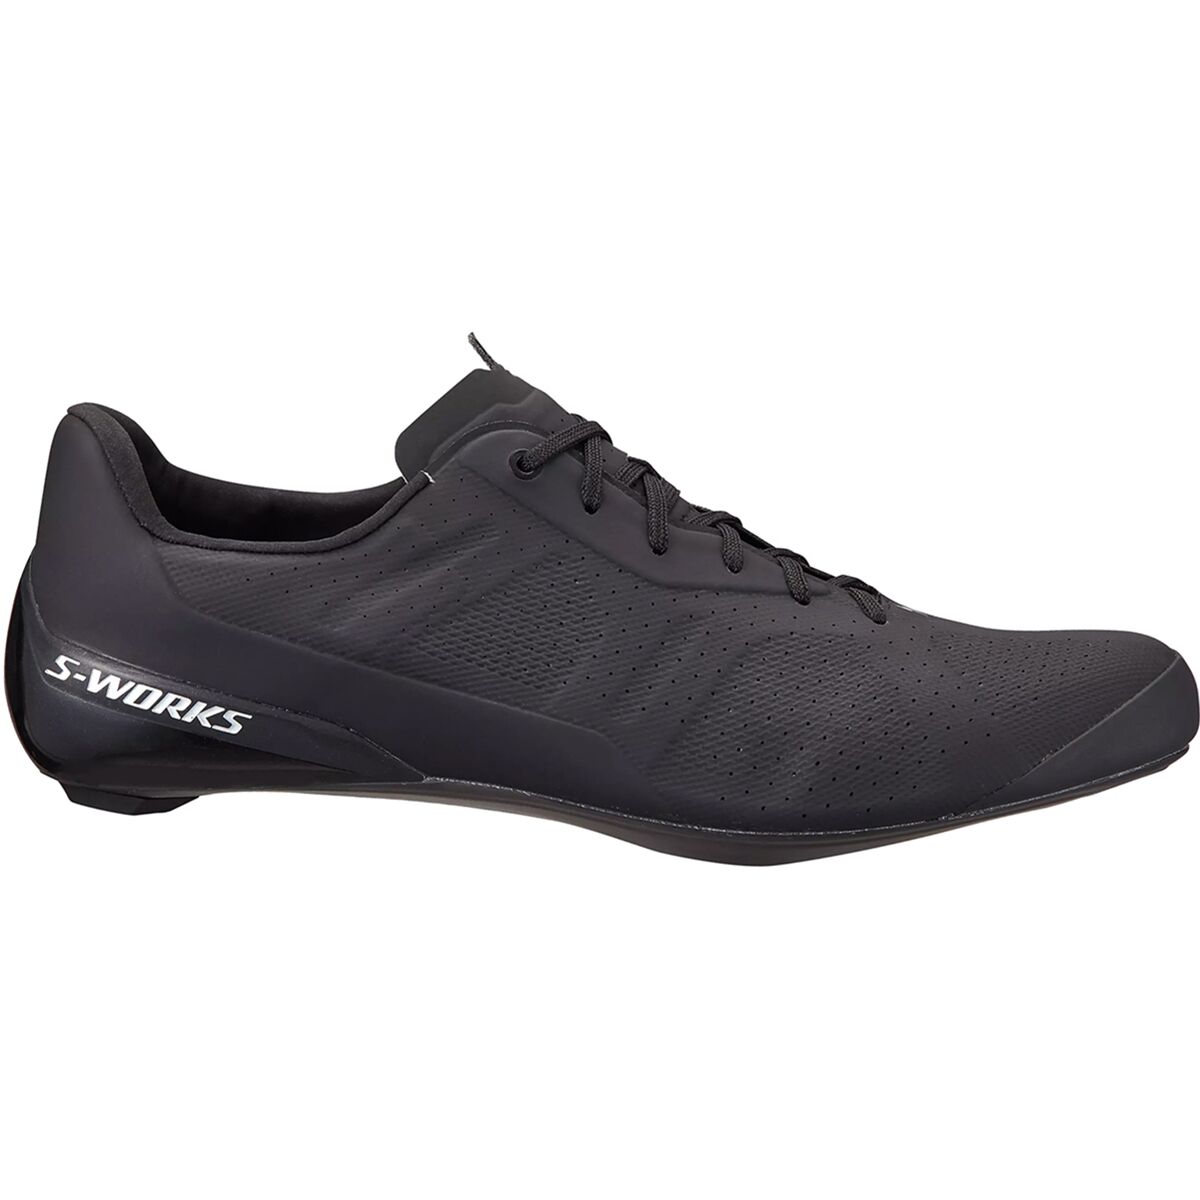 Specialized S-Works Torch Lace Road Shoe Black, 48.0 - Men's